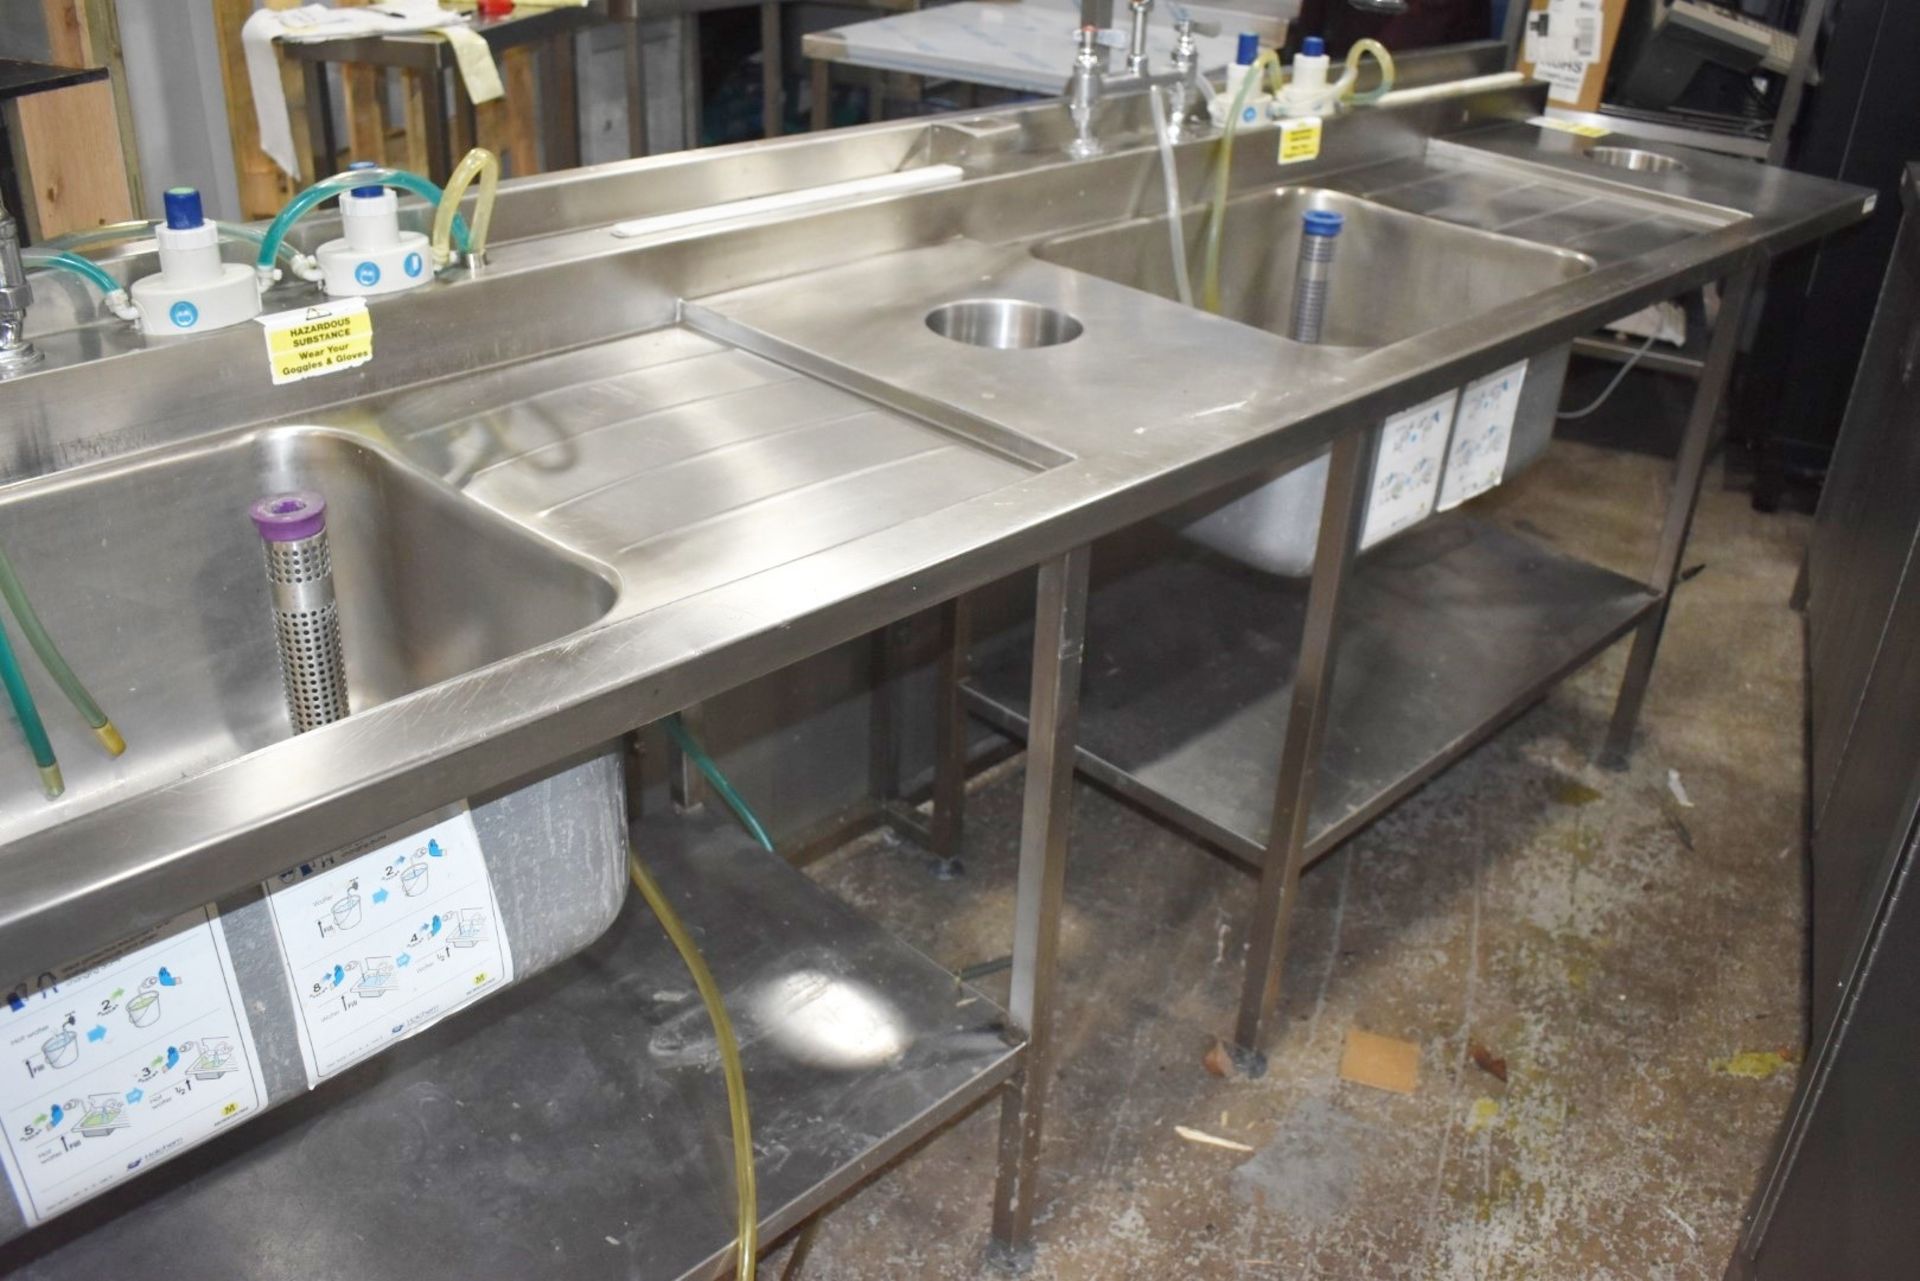 1 x Commercial Kitchen Wash Station With Two Large Sink Bowls, Mixer Taps, Spray Wash Guns, Drainer, - Image 10 of 22